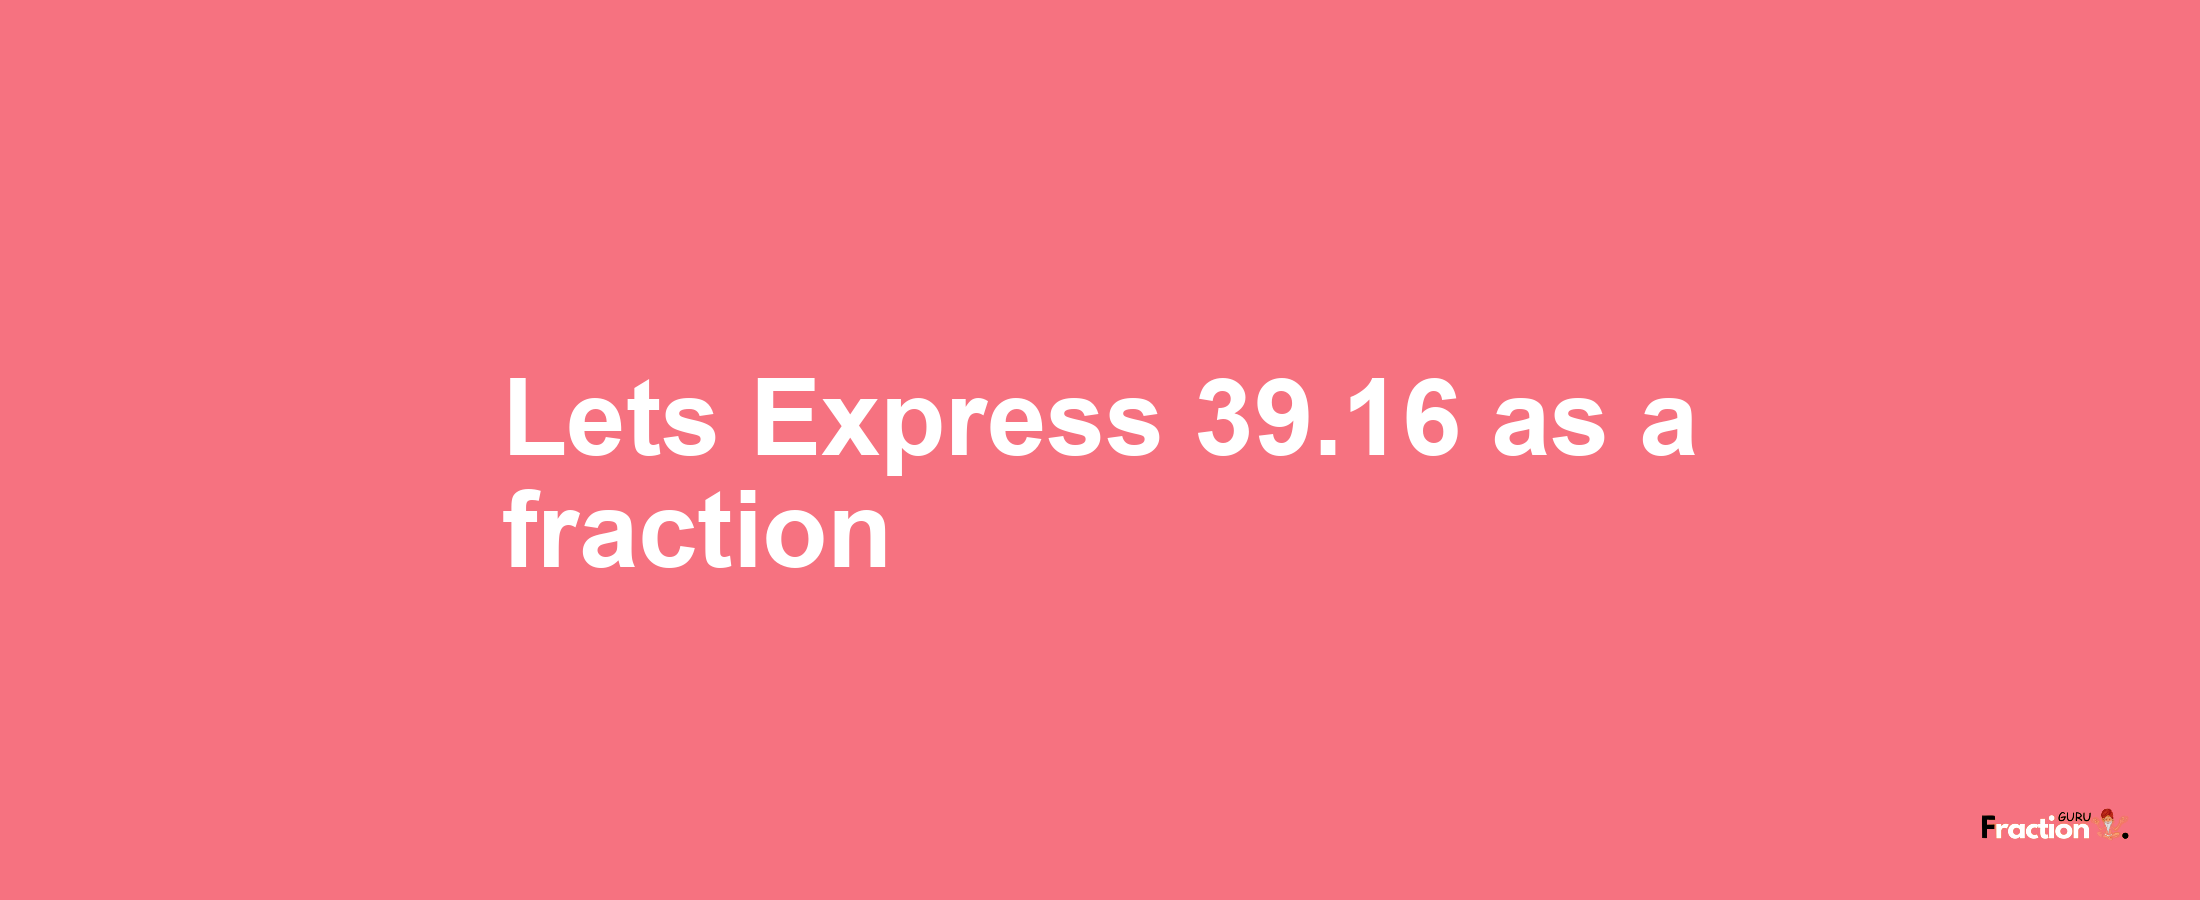 Lets Express 39.16 as afraction